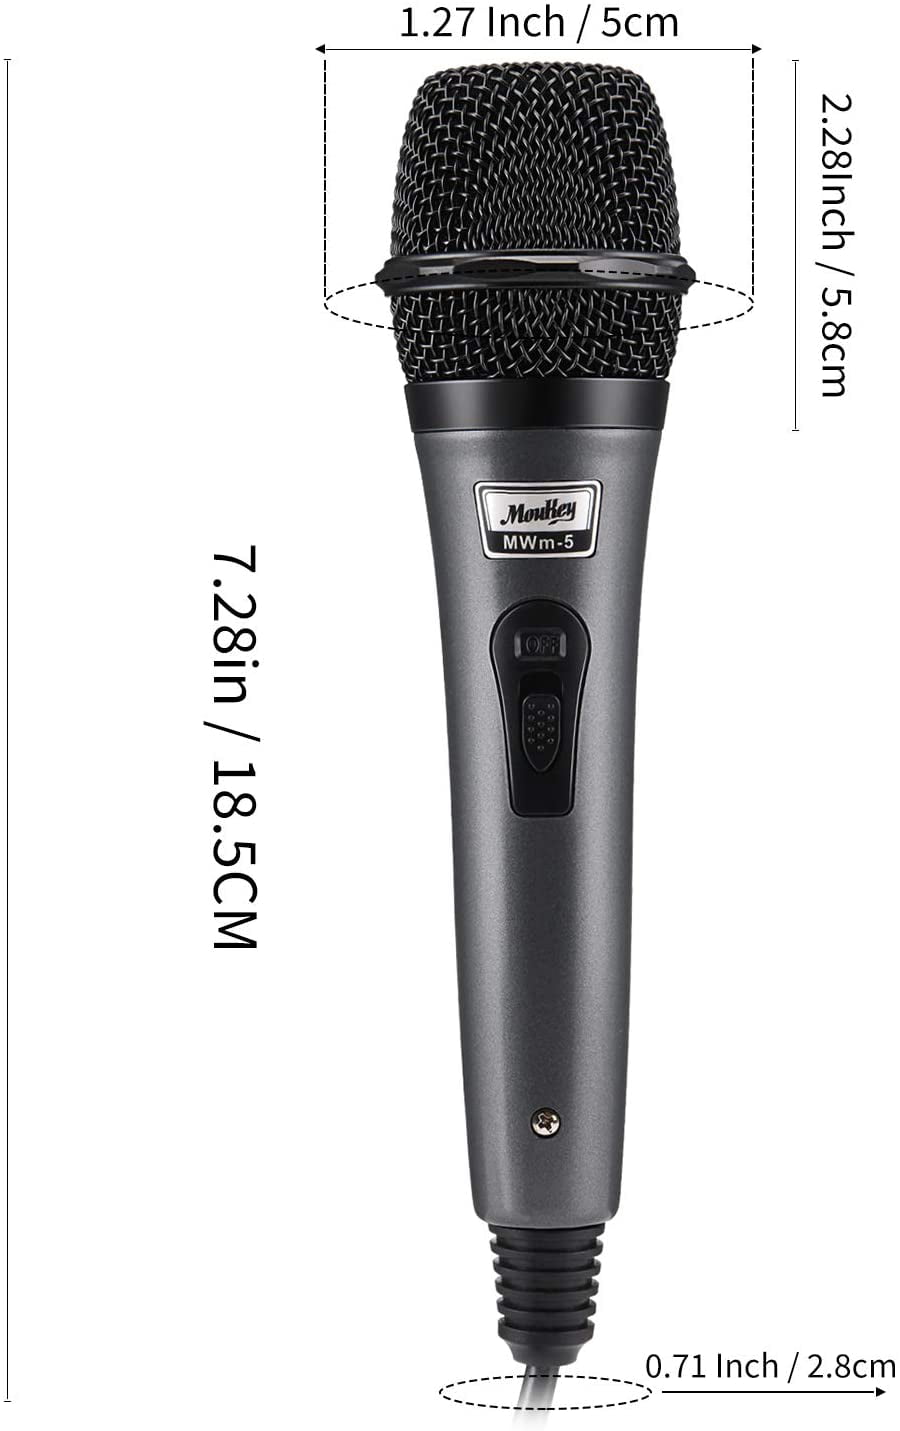 Ideally Suited for Speakers Shinco Handheld Mic Amp Mixer Karaoke Singing Machine Dynamic Cardioid Microphone with 13ft Cable and ON/Off Switch 